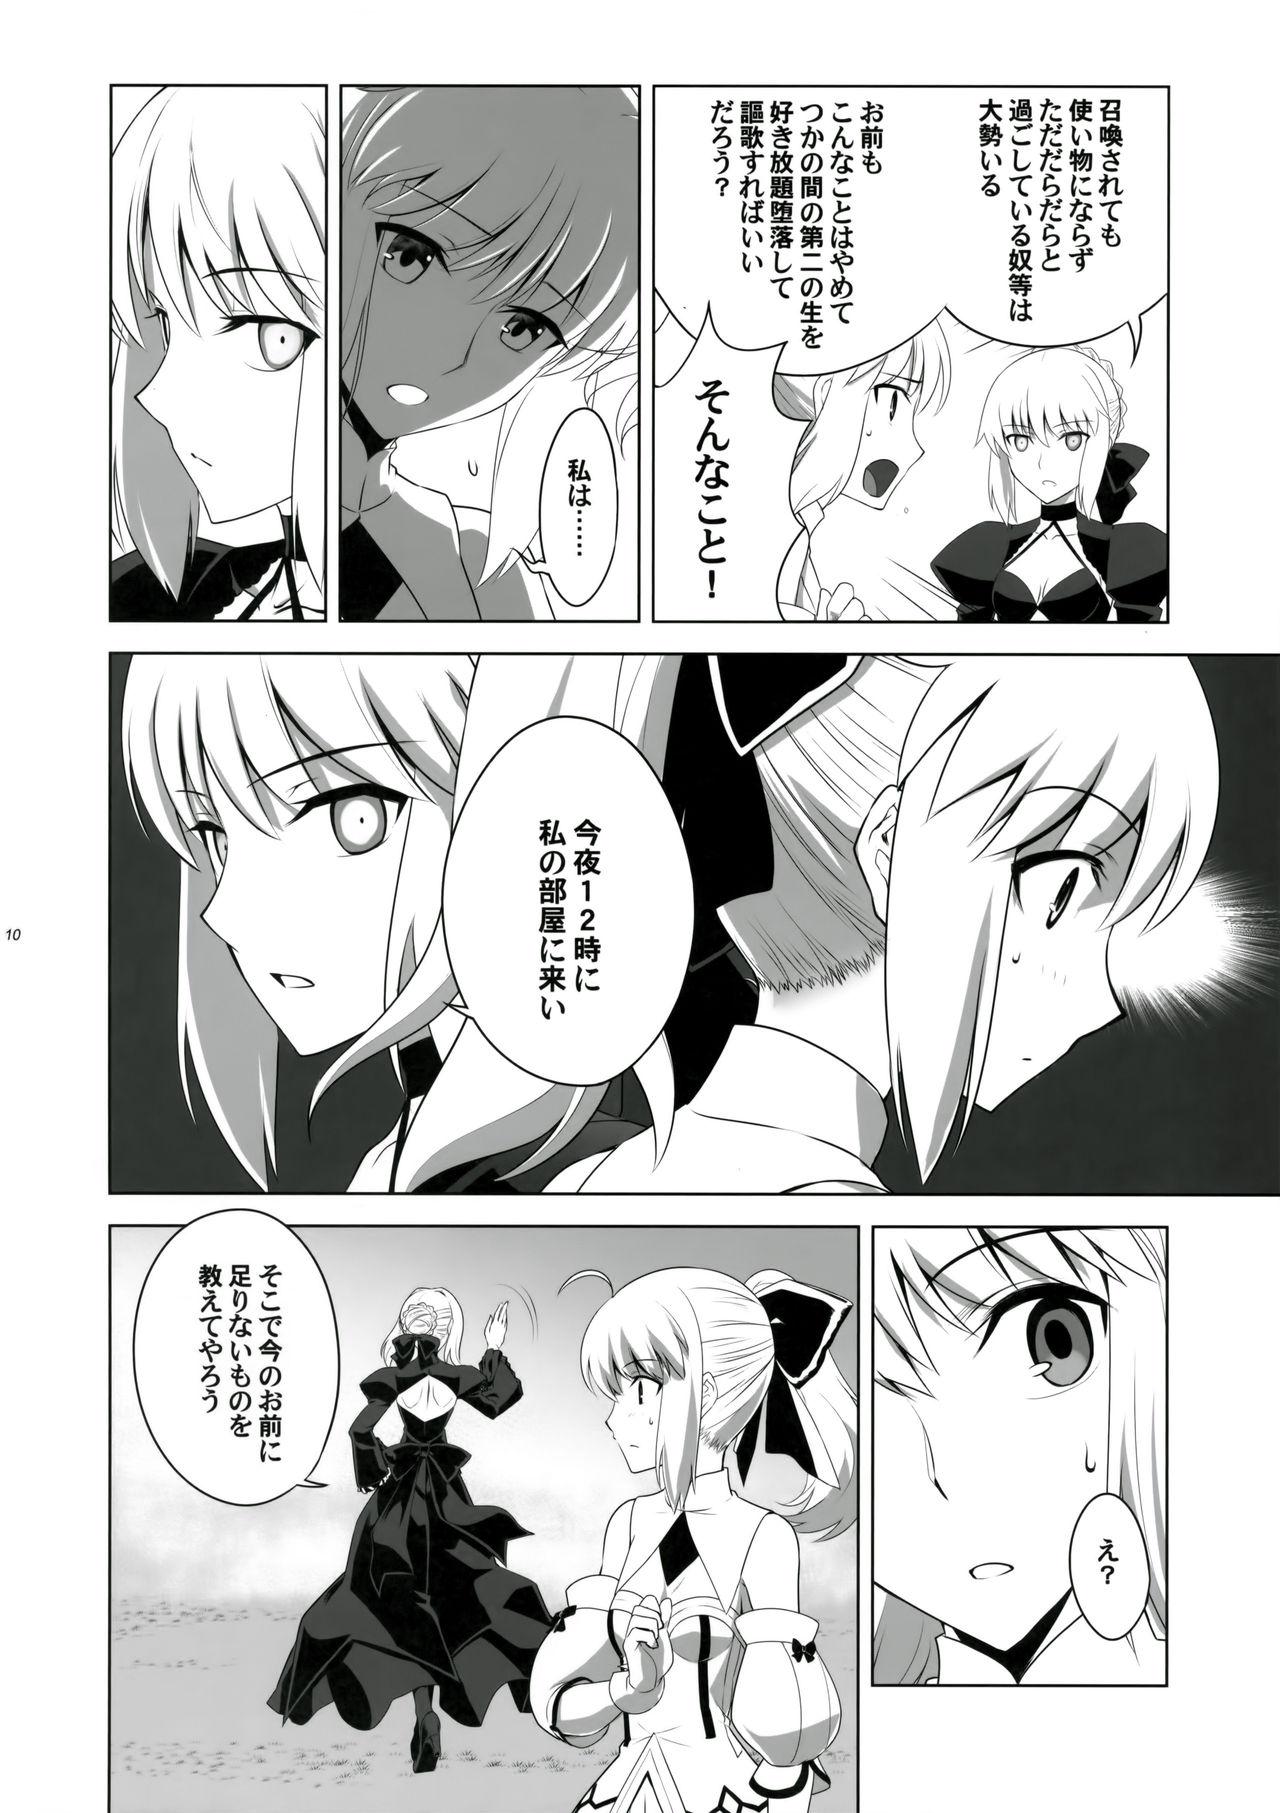 Penetration T*MOON COMPLEX GO 05 - Fate grand order Teasing - Page 9